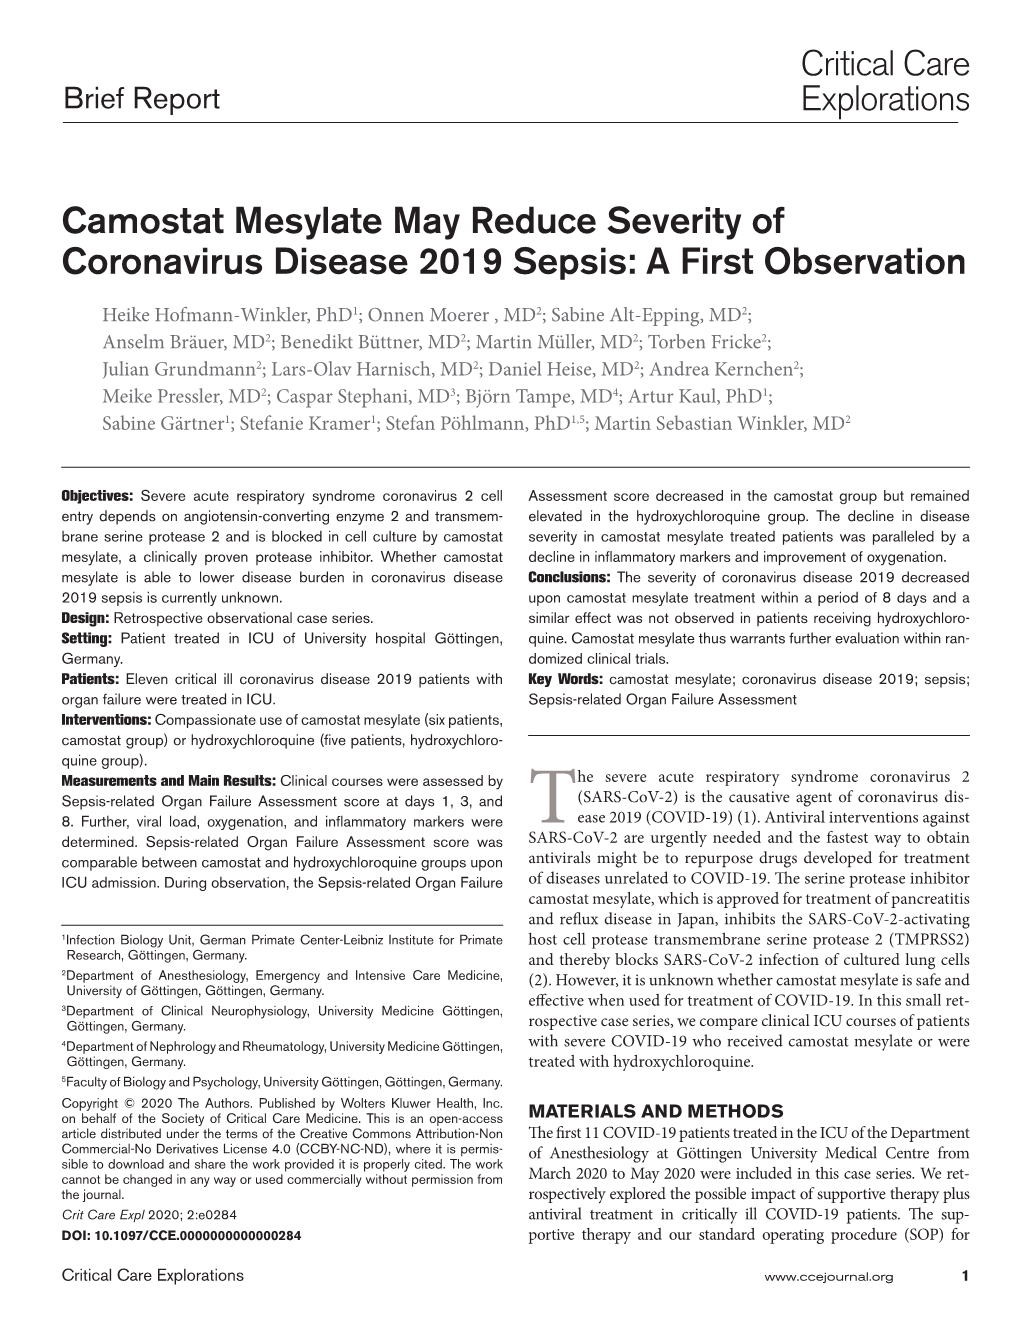 Camostat Mesylate May Reduce Severity of Coronavirus Disease 2019 Sepsis: a First Observation